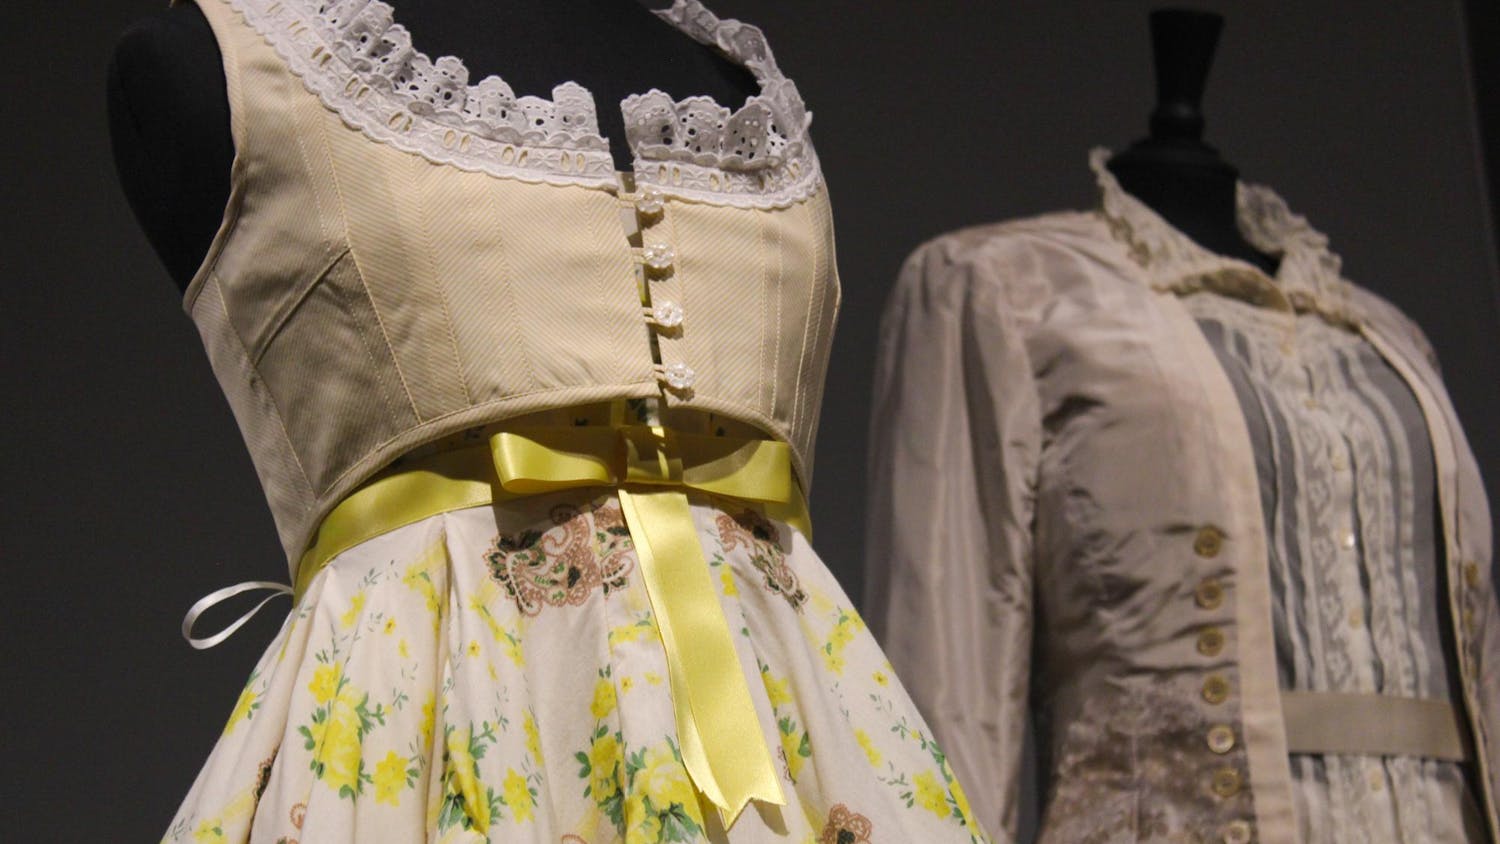 Details of a yellow floral dress designed by Lee Alexander McQueen on display at “Rendez-Vous,” at the Columbia Museum of Art on Jan. 9, 2024. The museum’s rotating exhibit has been on display since early October of 2023 and is set to close on Jan. 21, 2024.